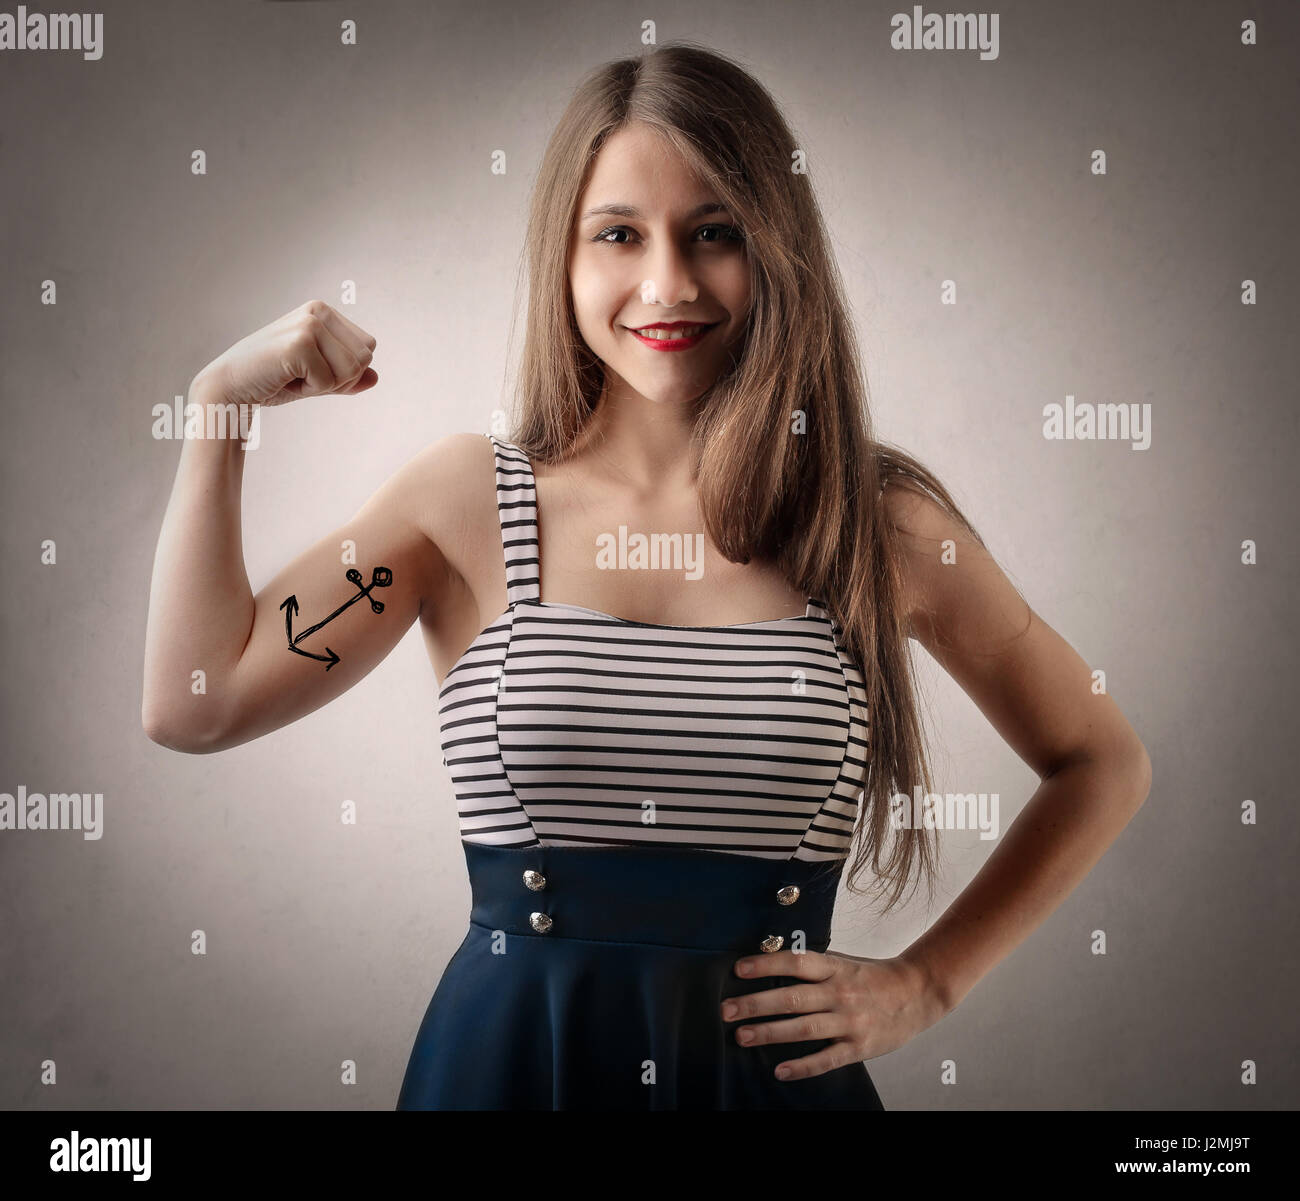 Strong woman with tattoo Stock Photo - Alamy